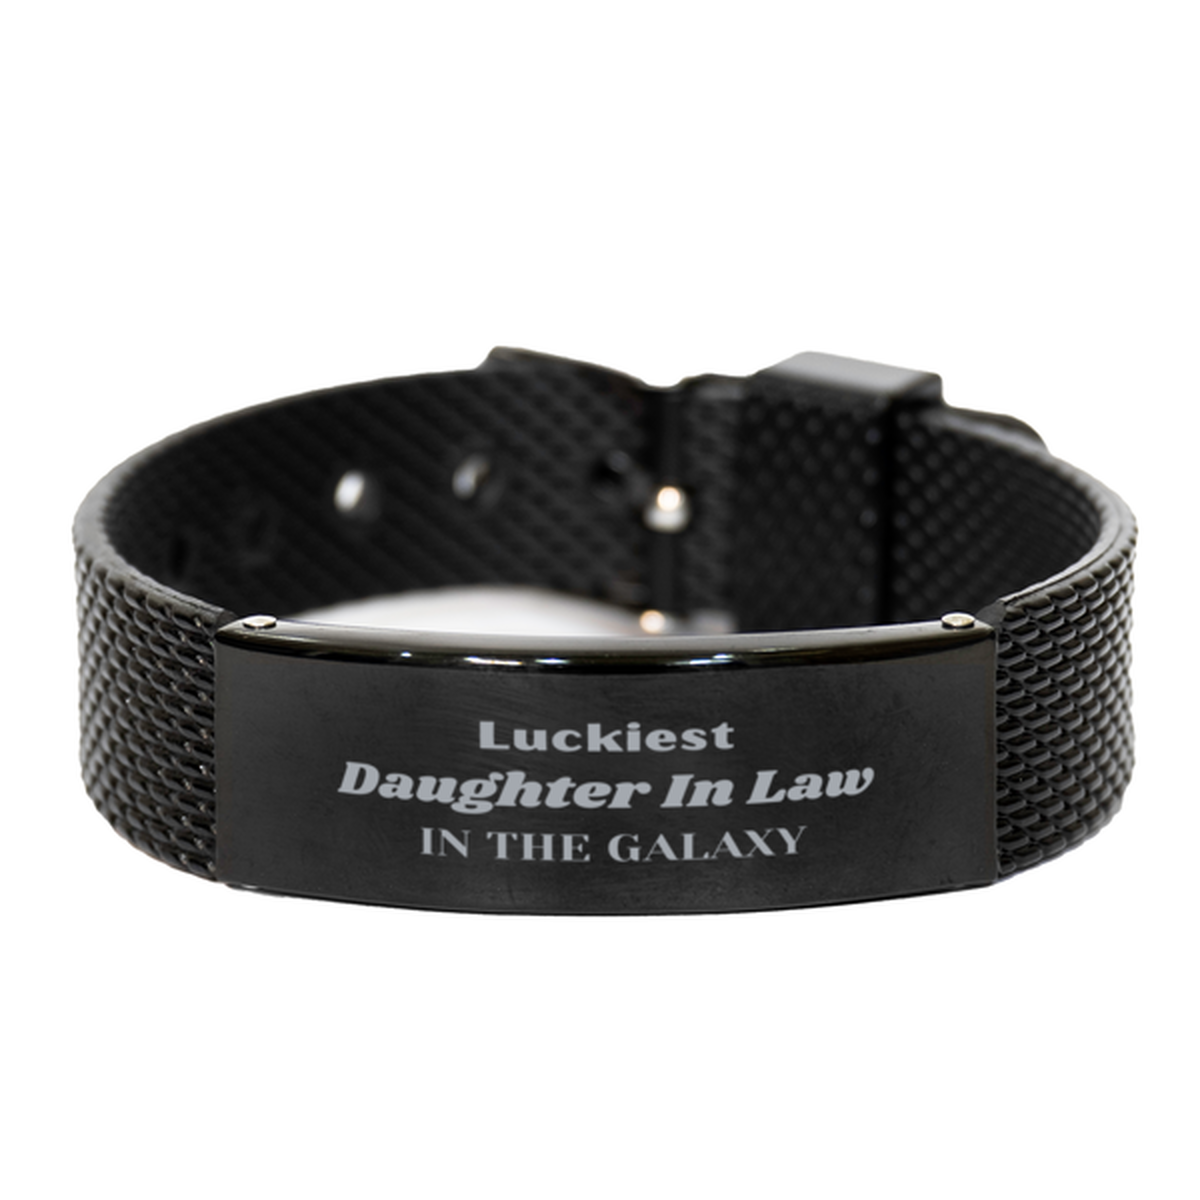 Luckiest Daughter In Law in the Galaxy, To My Daughter In Law Engraved Gifts, Christmas Daughter In Law Black Shark Mesh Bracelet Gifts, X-mas Birthday Unique Gifts For Daughter In Law Men Women